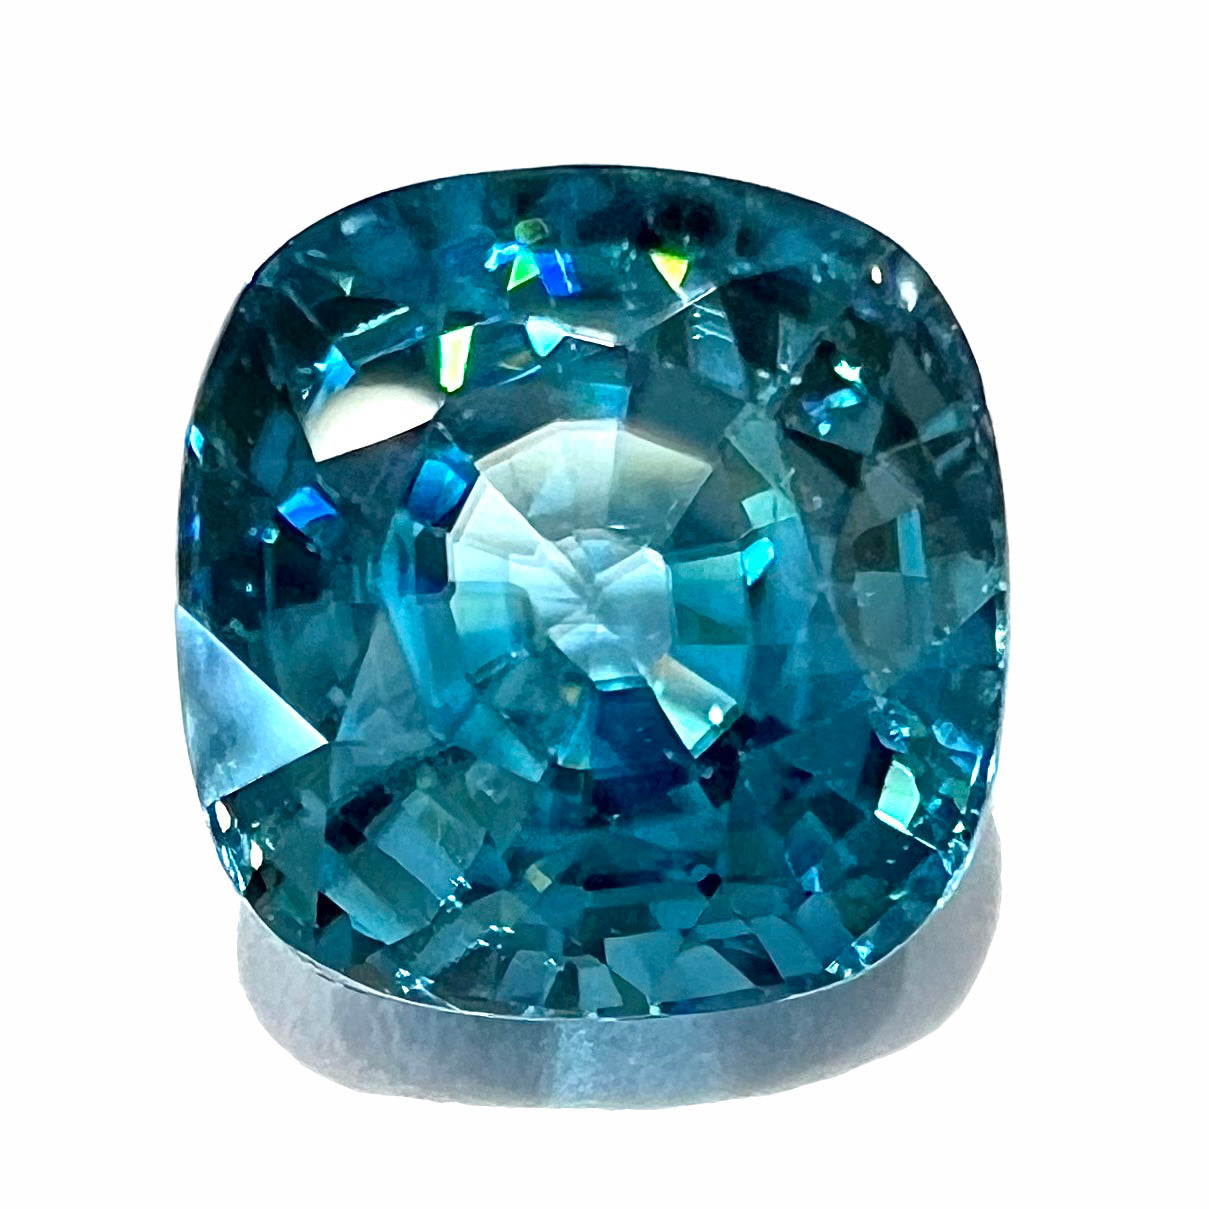 A loose cushion cut blue zircon stone.  The gem weighs 4.04 carats.